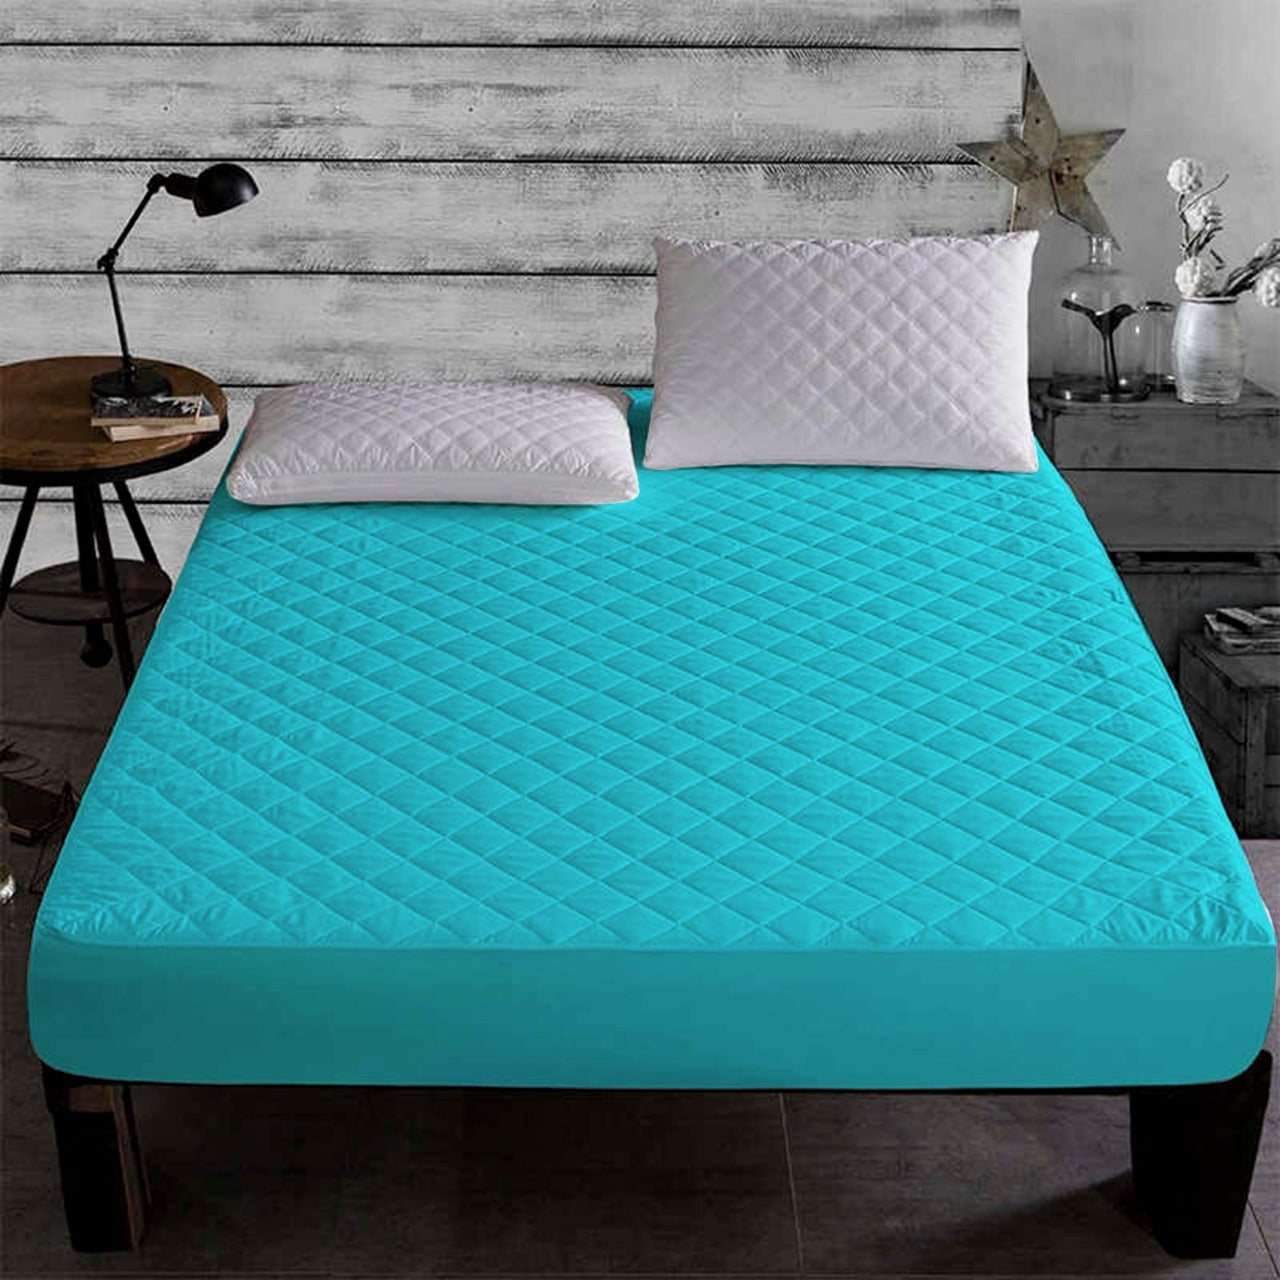 Quilted Waterproof Mattress Protector-Turquoise Apricot